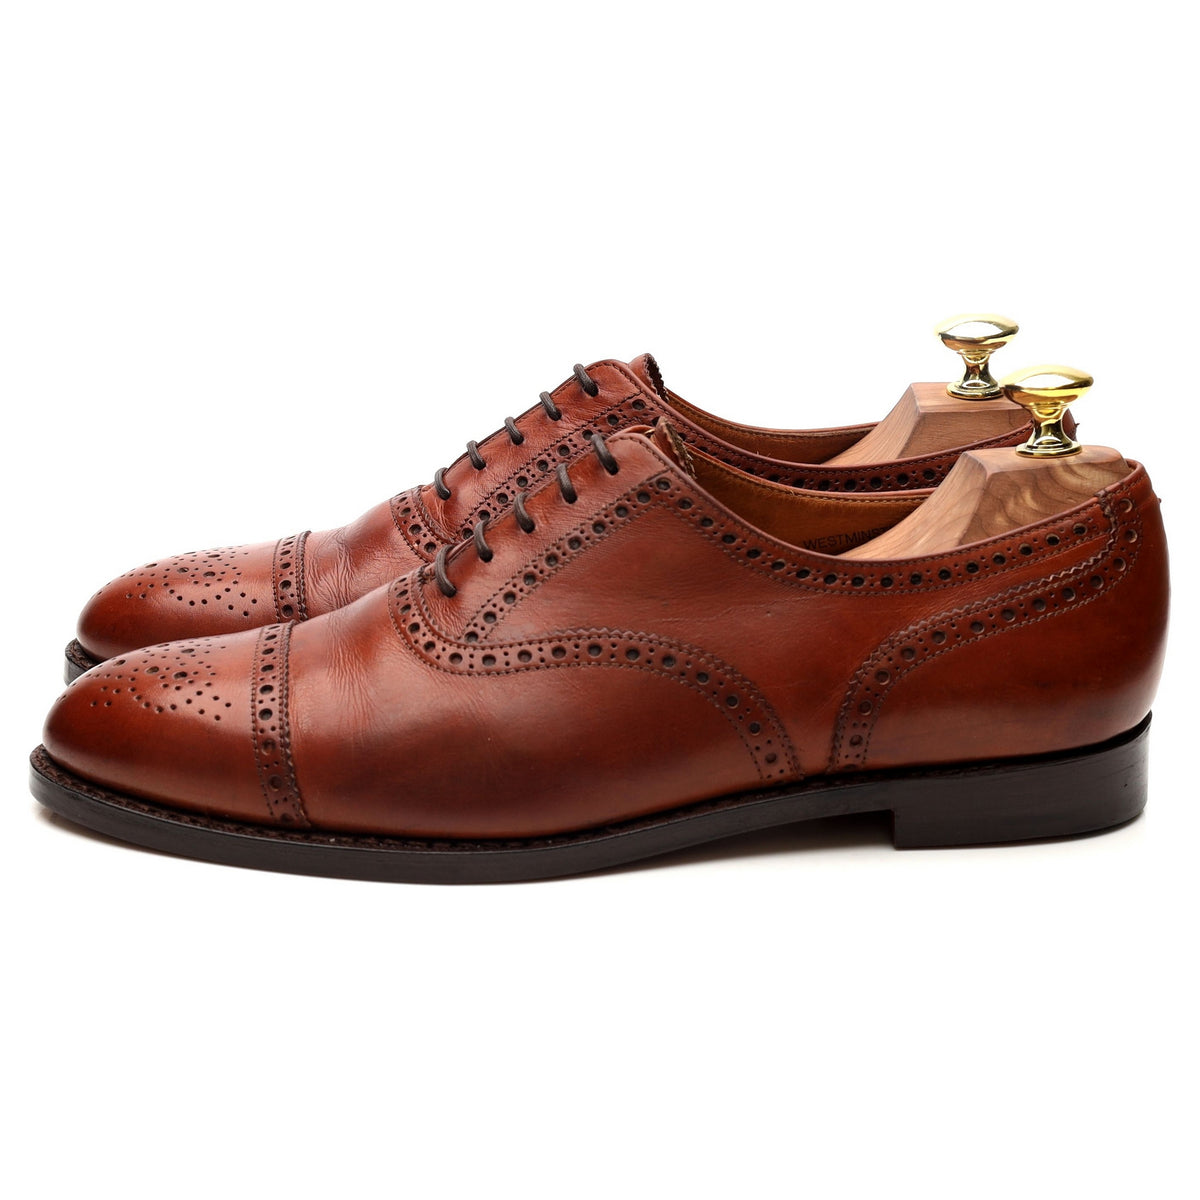 Westminster' Tan Brown Leather Oxford Semi Brogues UK 7.5 E